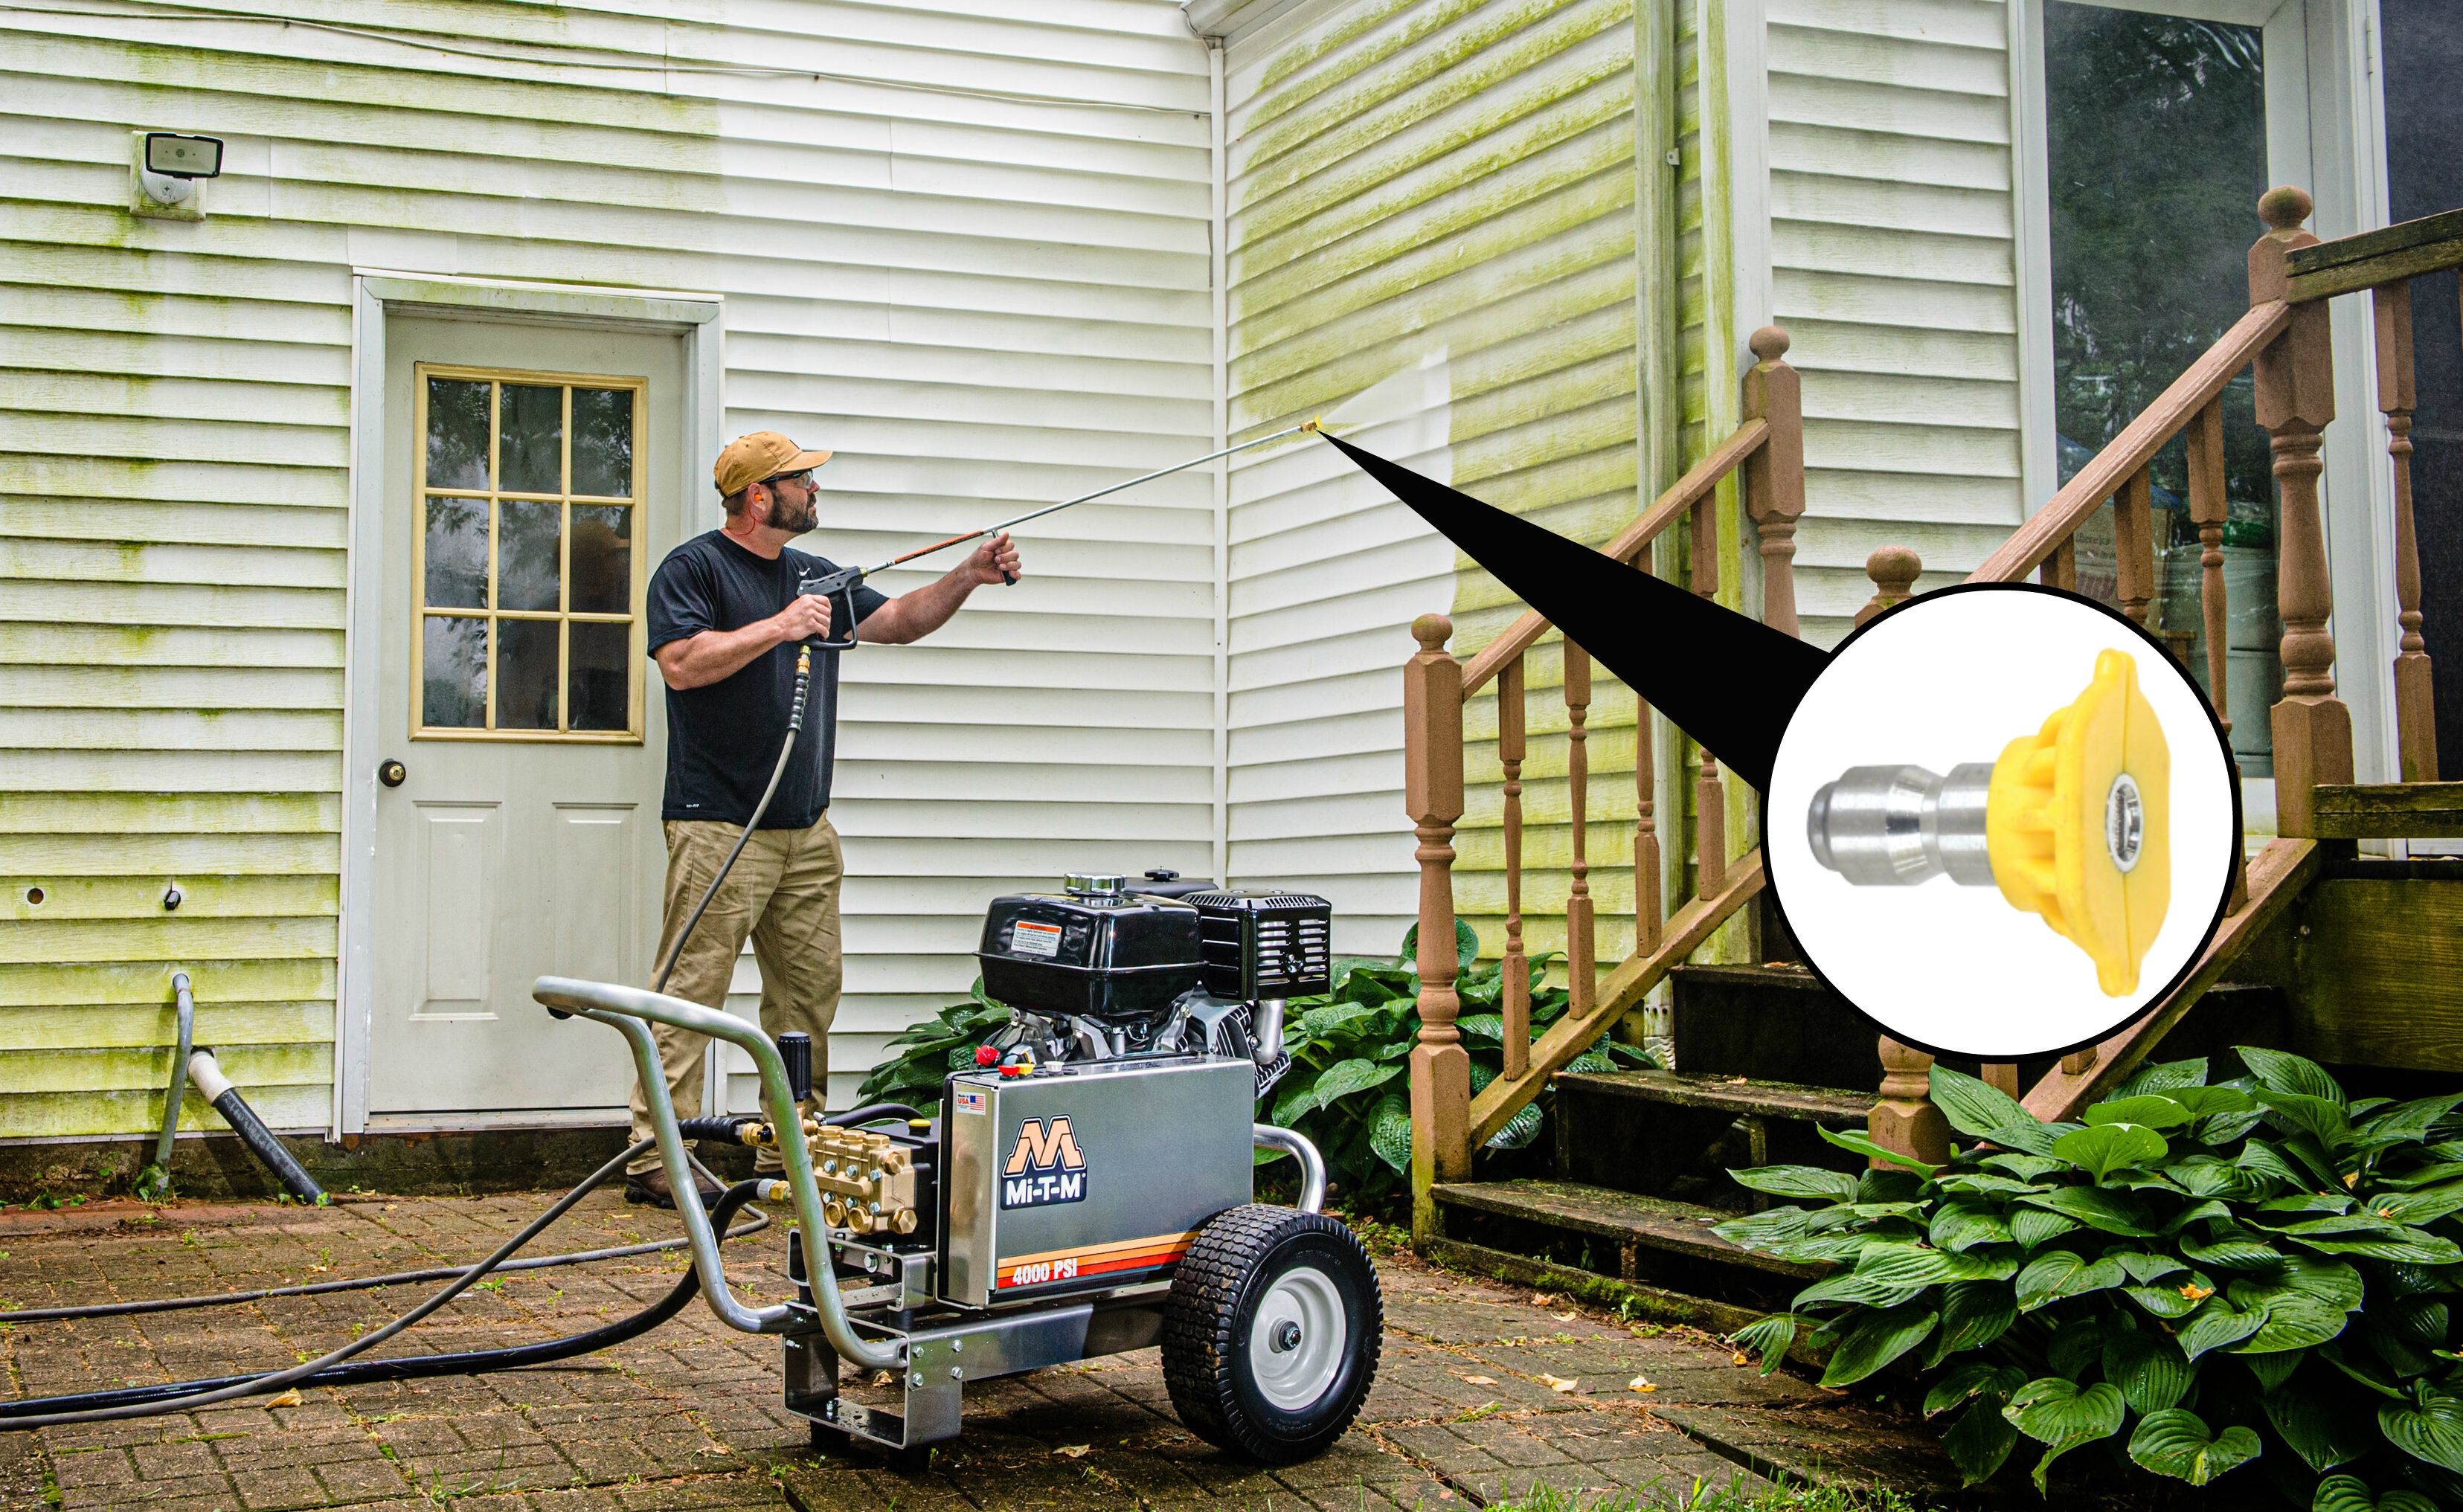 Over 25 Ways to Use a Pressure Washer at Home - How to Use a Pressure Washer  At Home